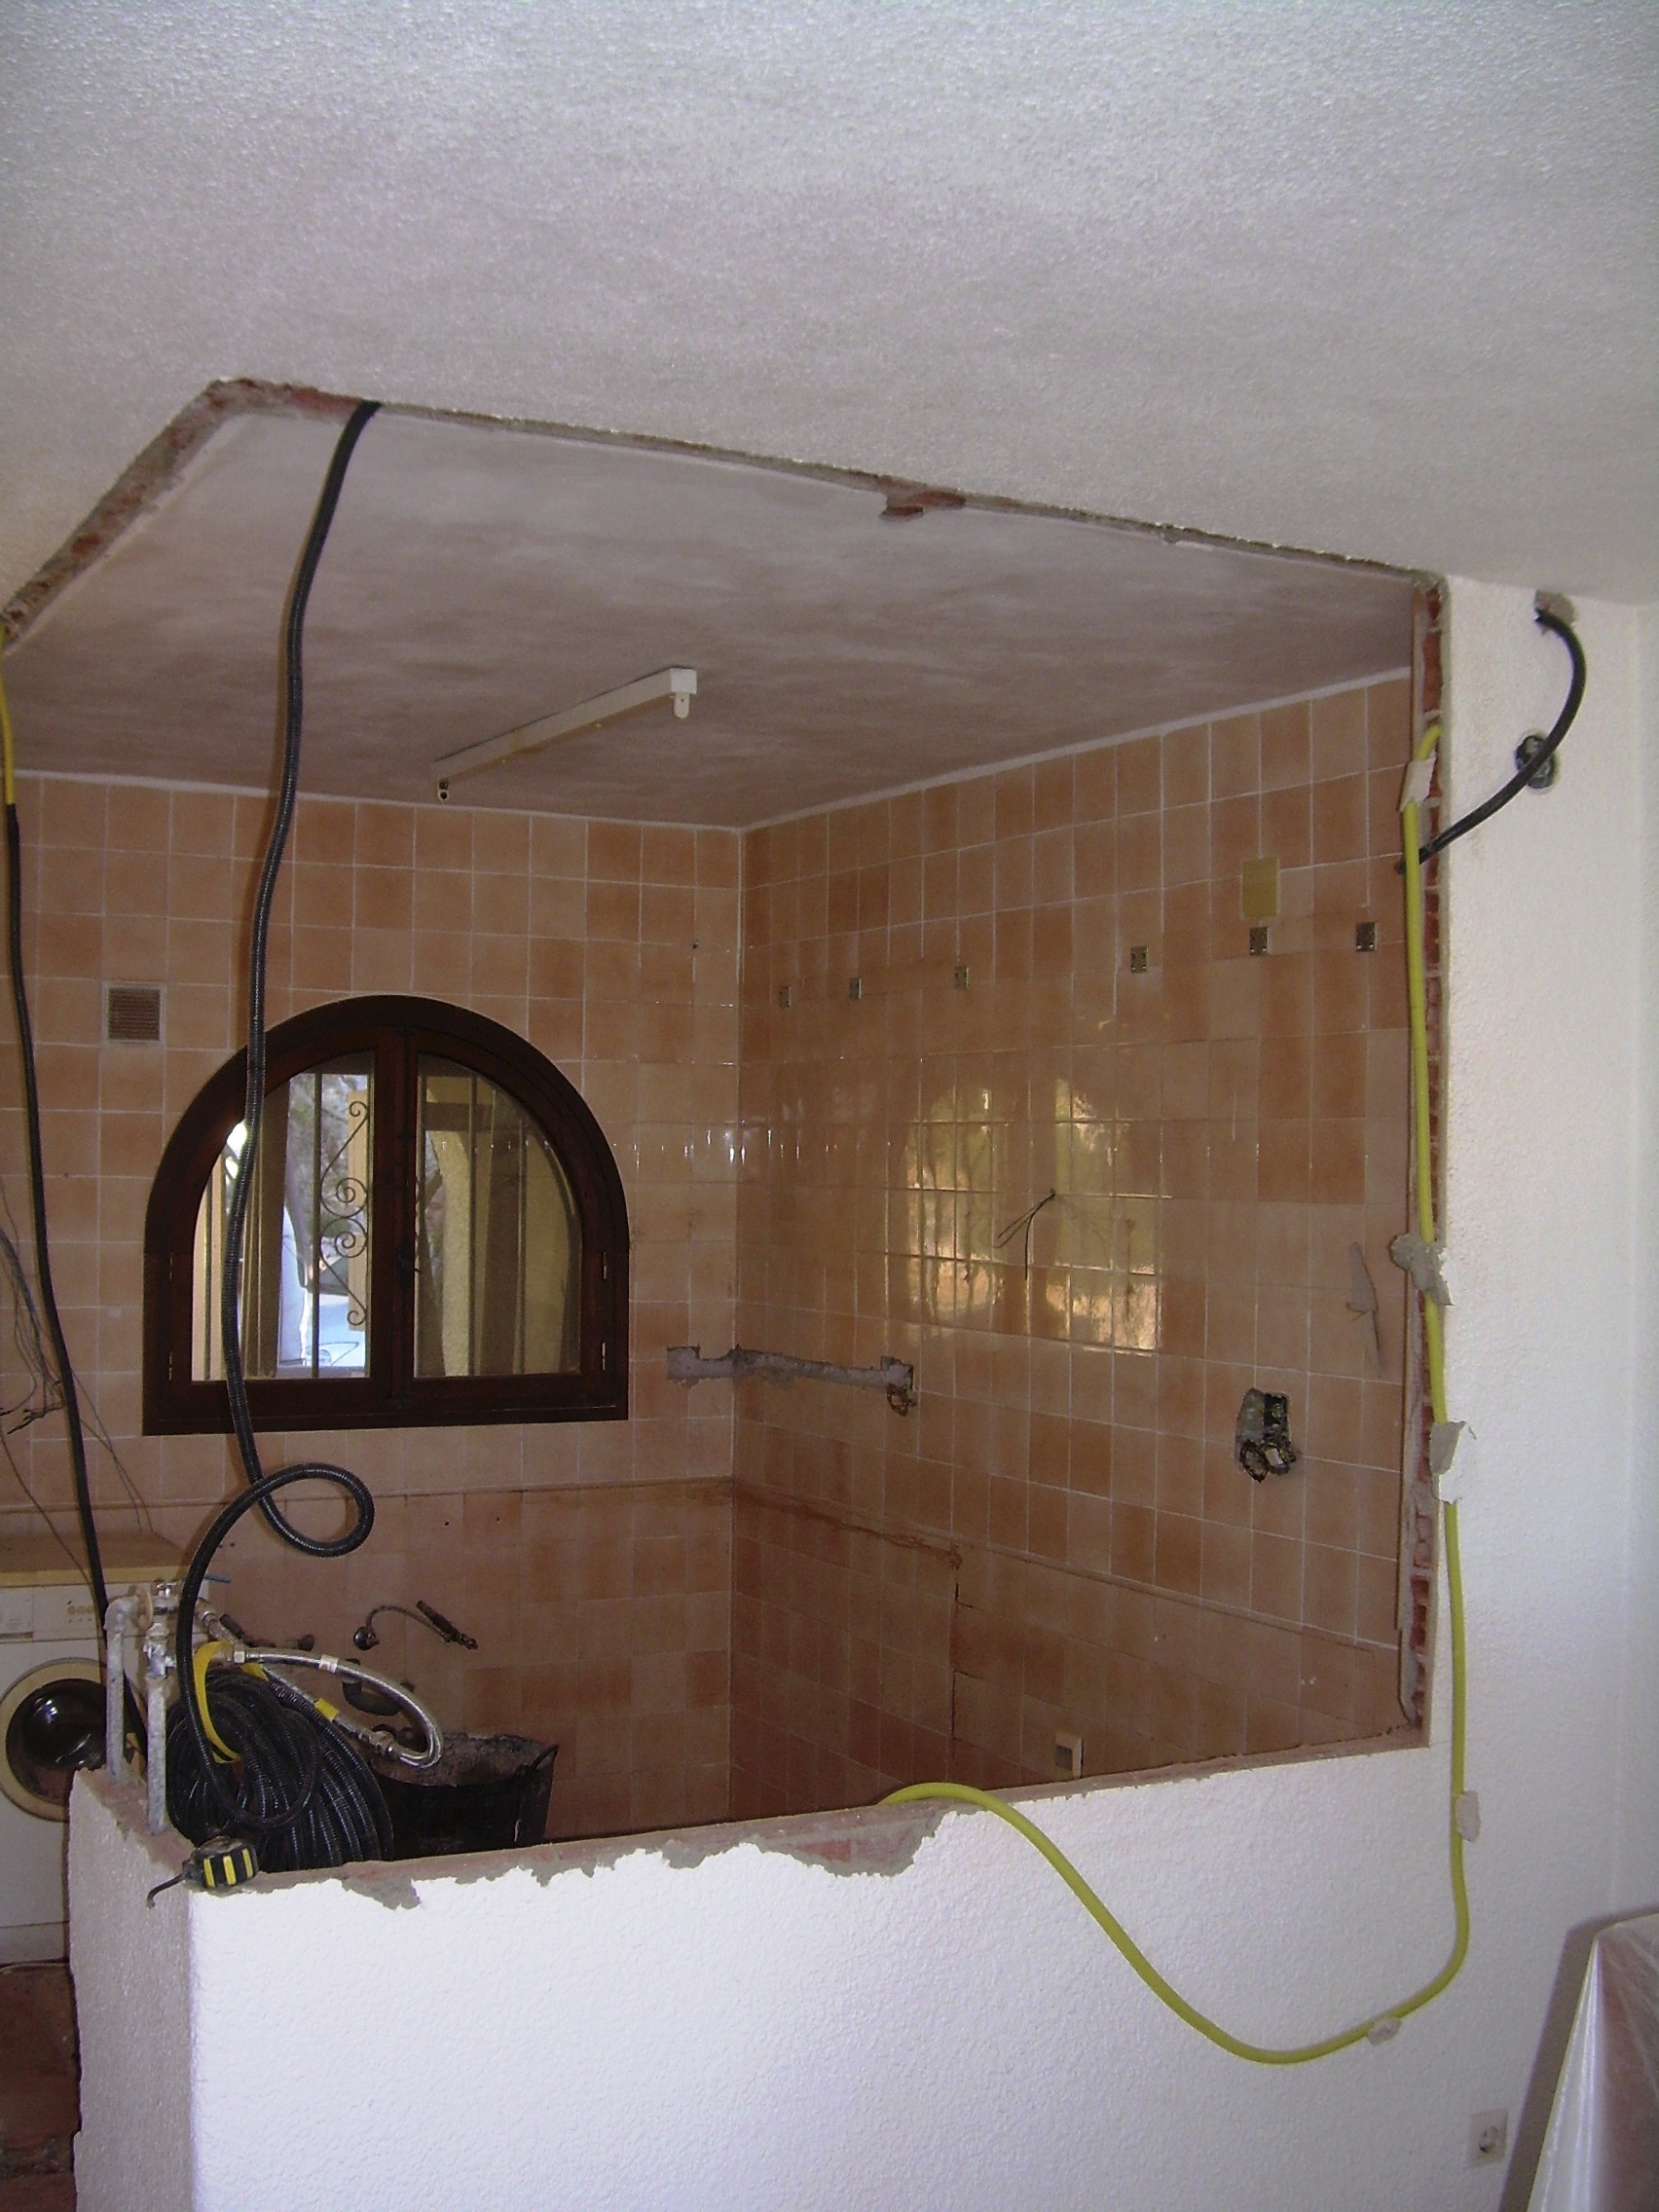 removing the walls for the kitchen refit in Altea